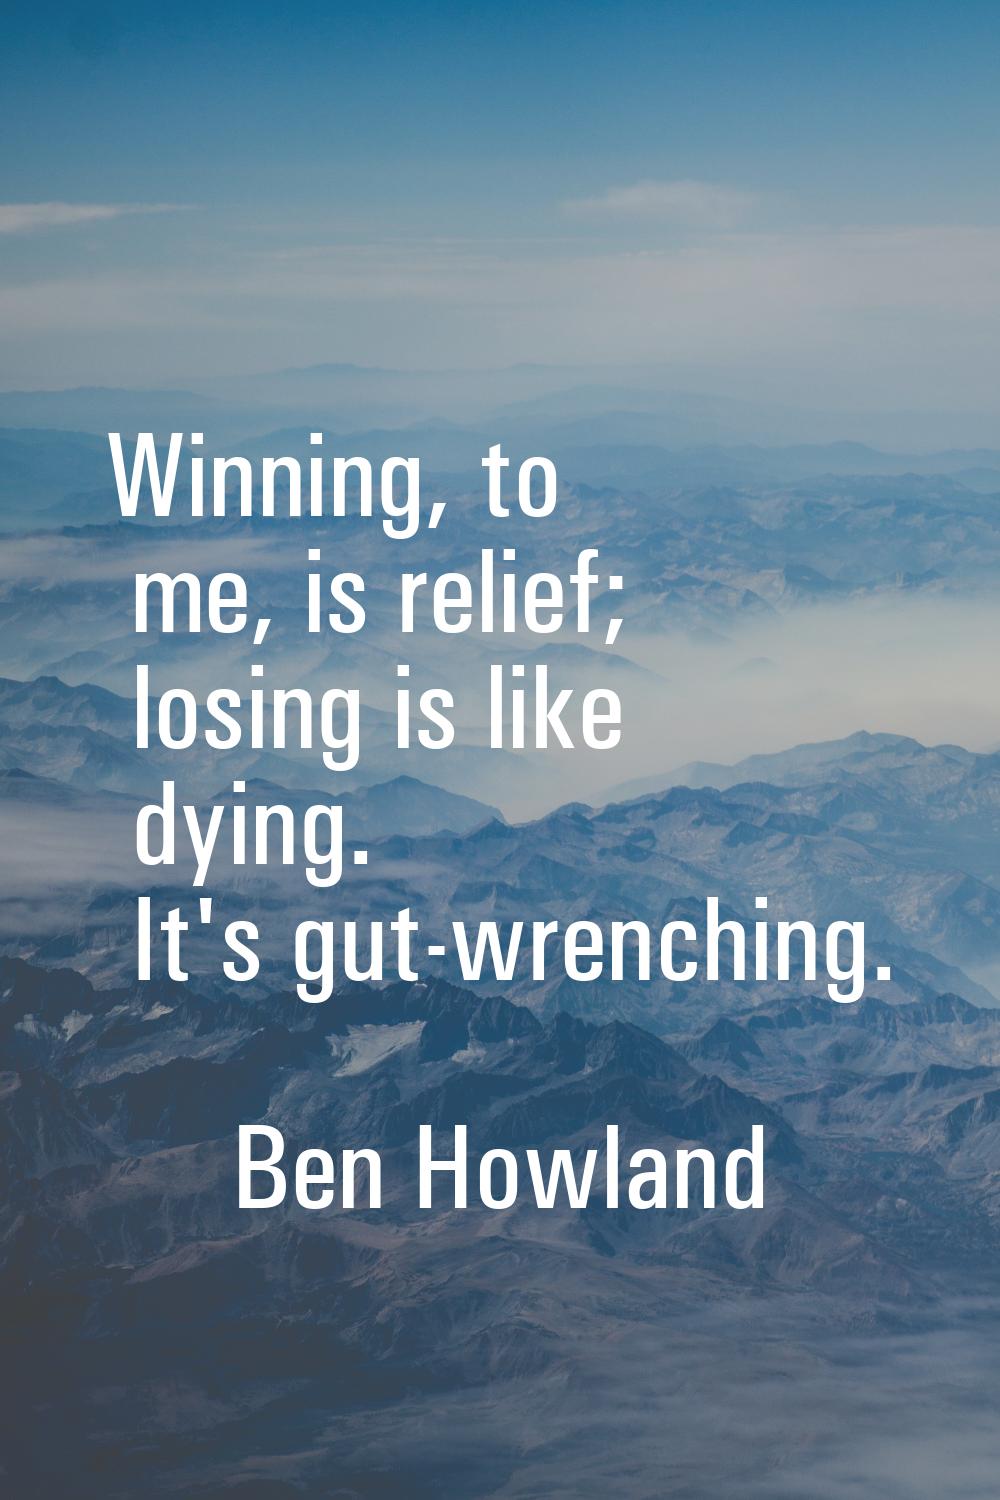 Winning, to me, is relief; losing is like dying. It's gut-wrenching.